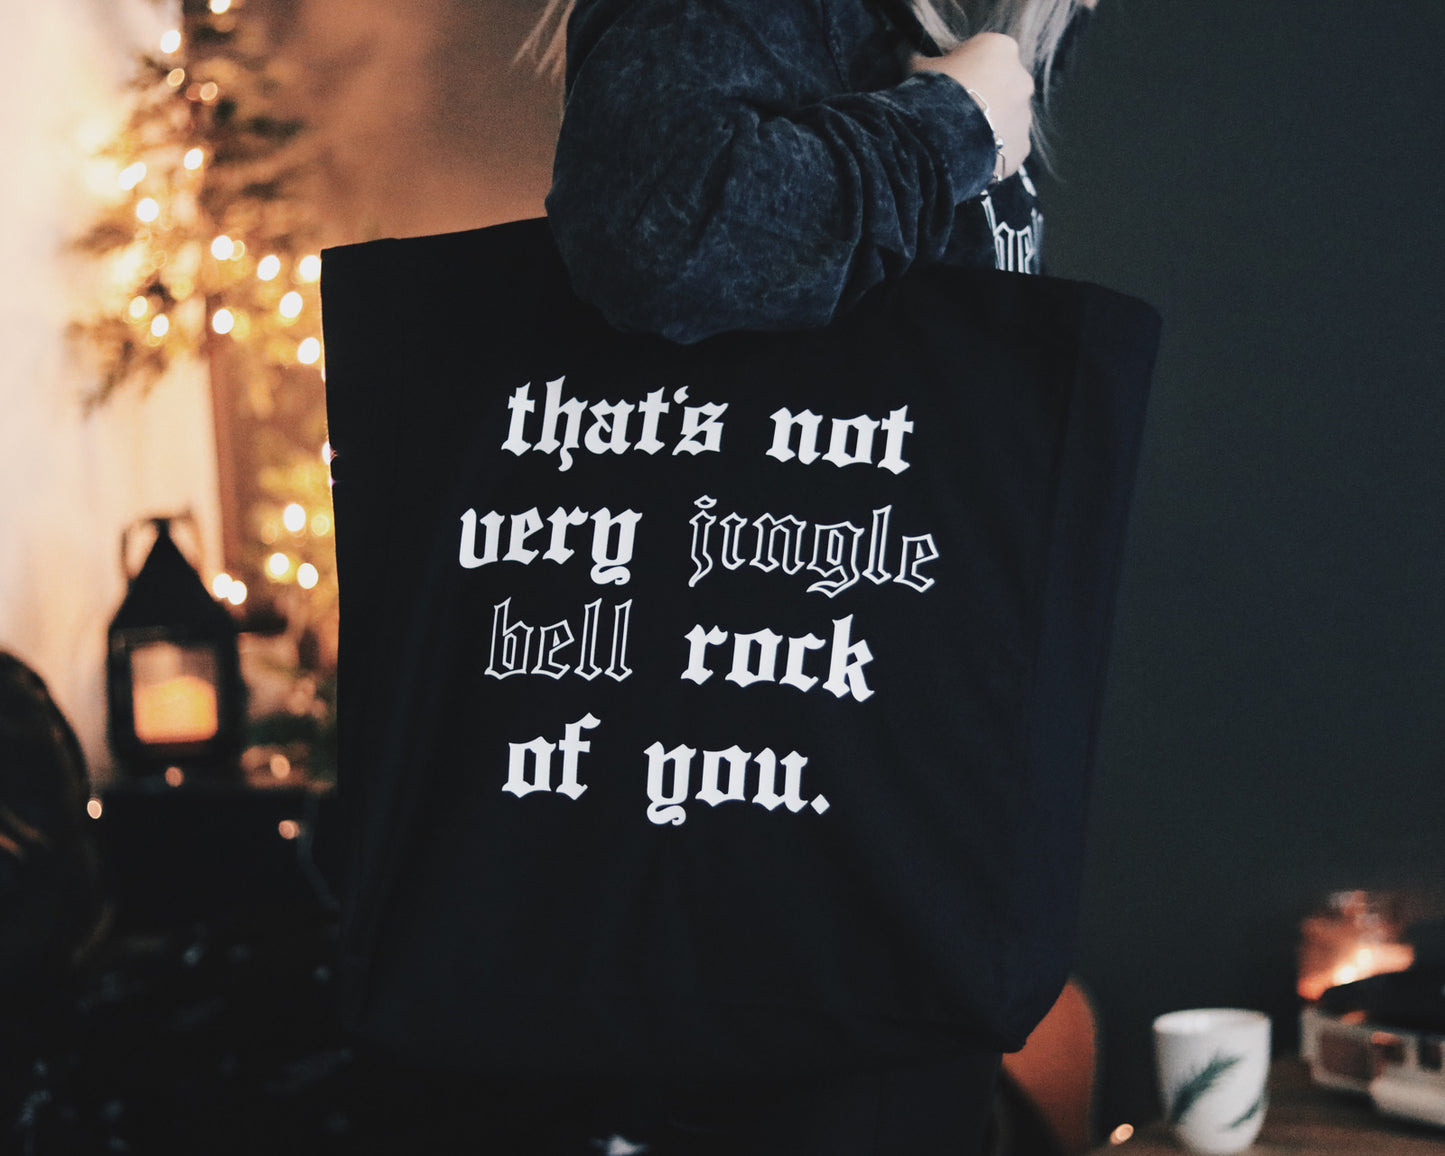 That's Not Very Jingle Bell Rock Of You - Tote Bag